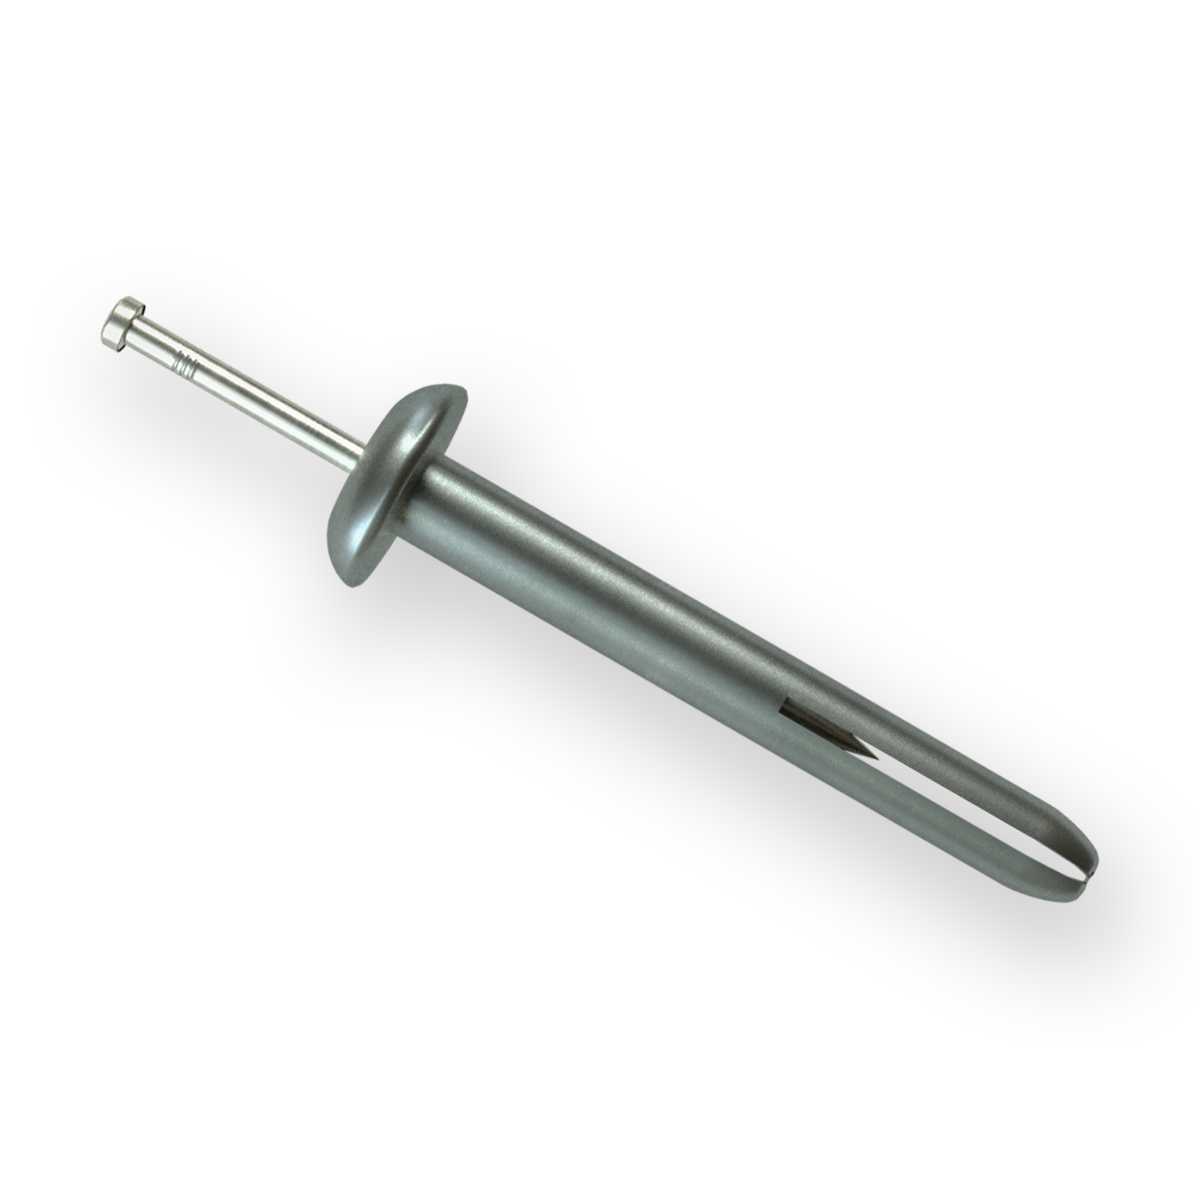 Drive-It™ Drive Pin Anchor- Type 304 Stainless Steel Pin Mechanical Anchors Wej-It